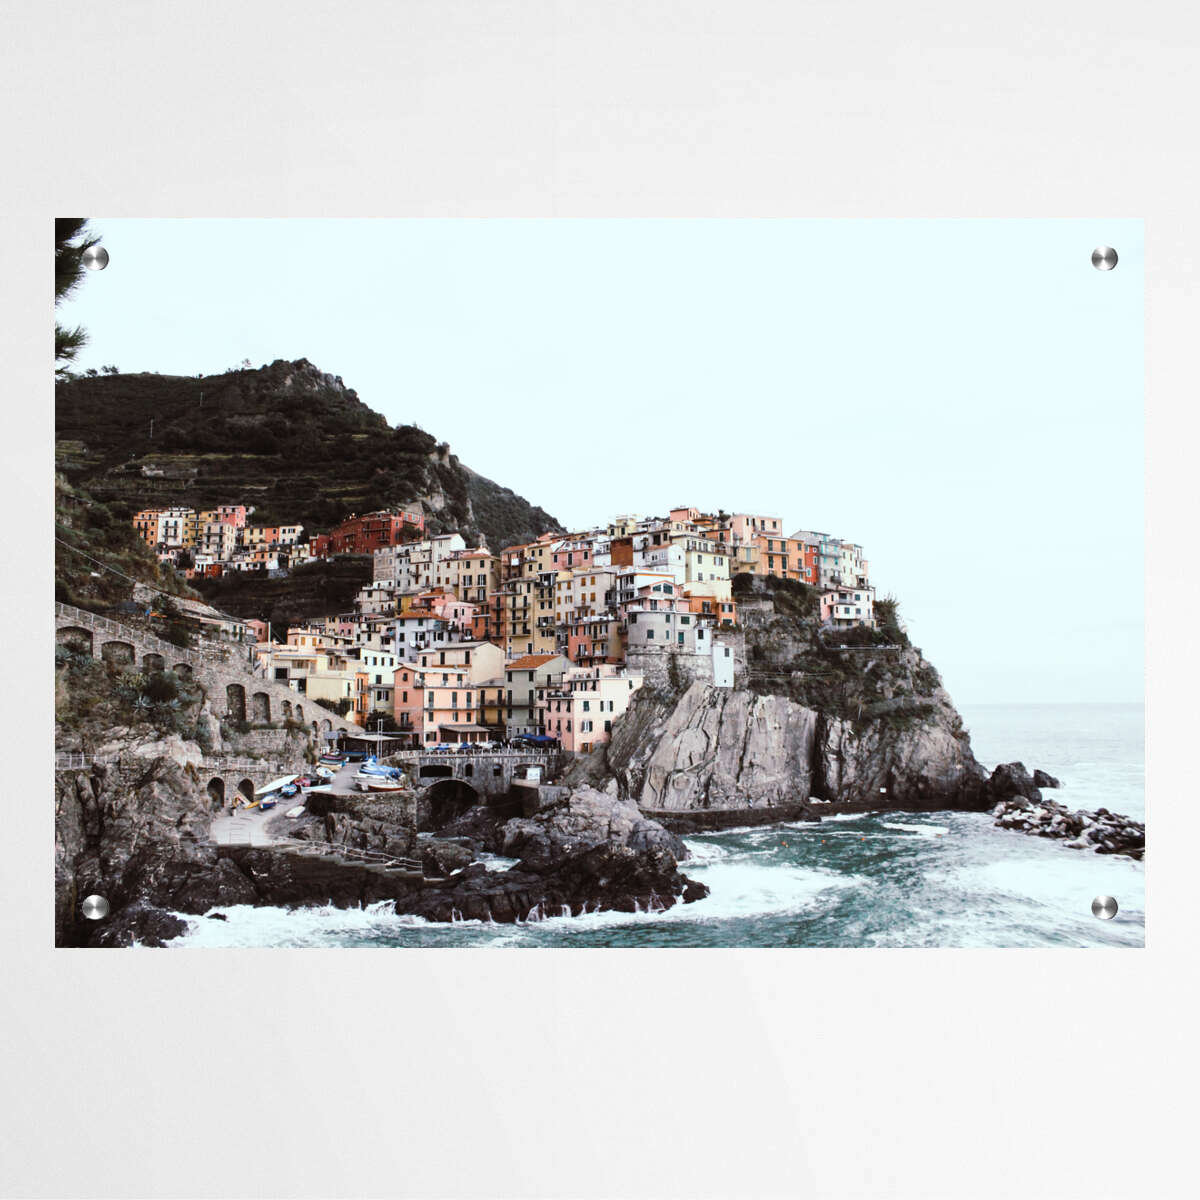 Cinque Terre Seaside Town in Italy | Beachside Wall Art Prints - The Canvas Hive